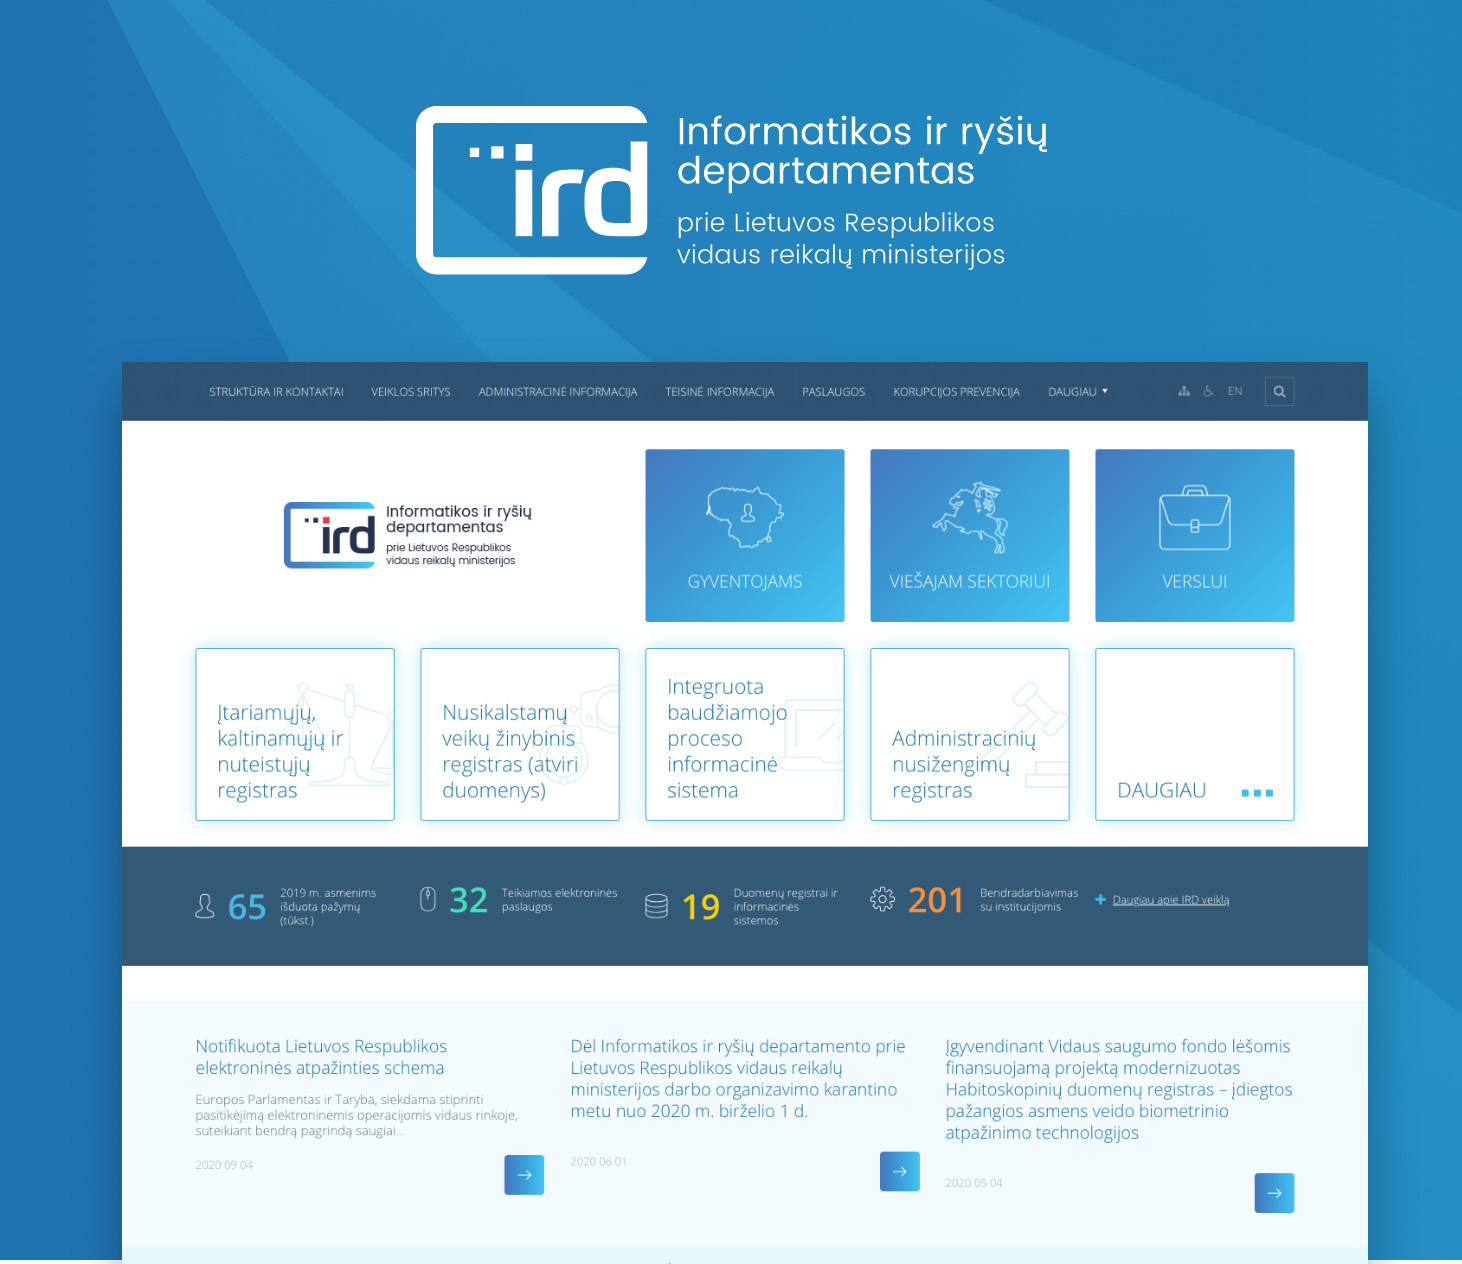 Trademark, proprietary style and website of the information technology and communications department